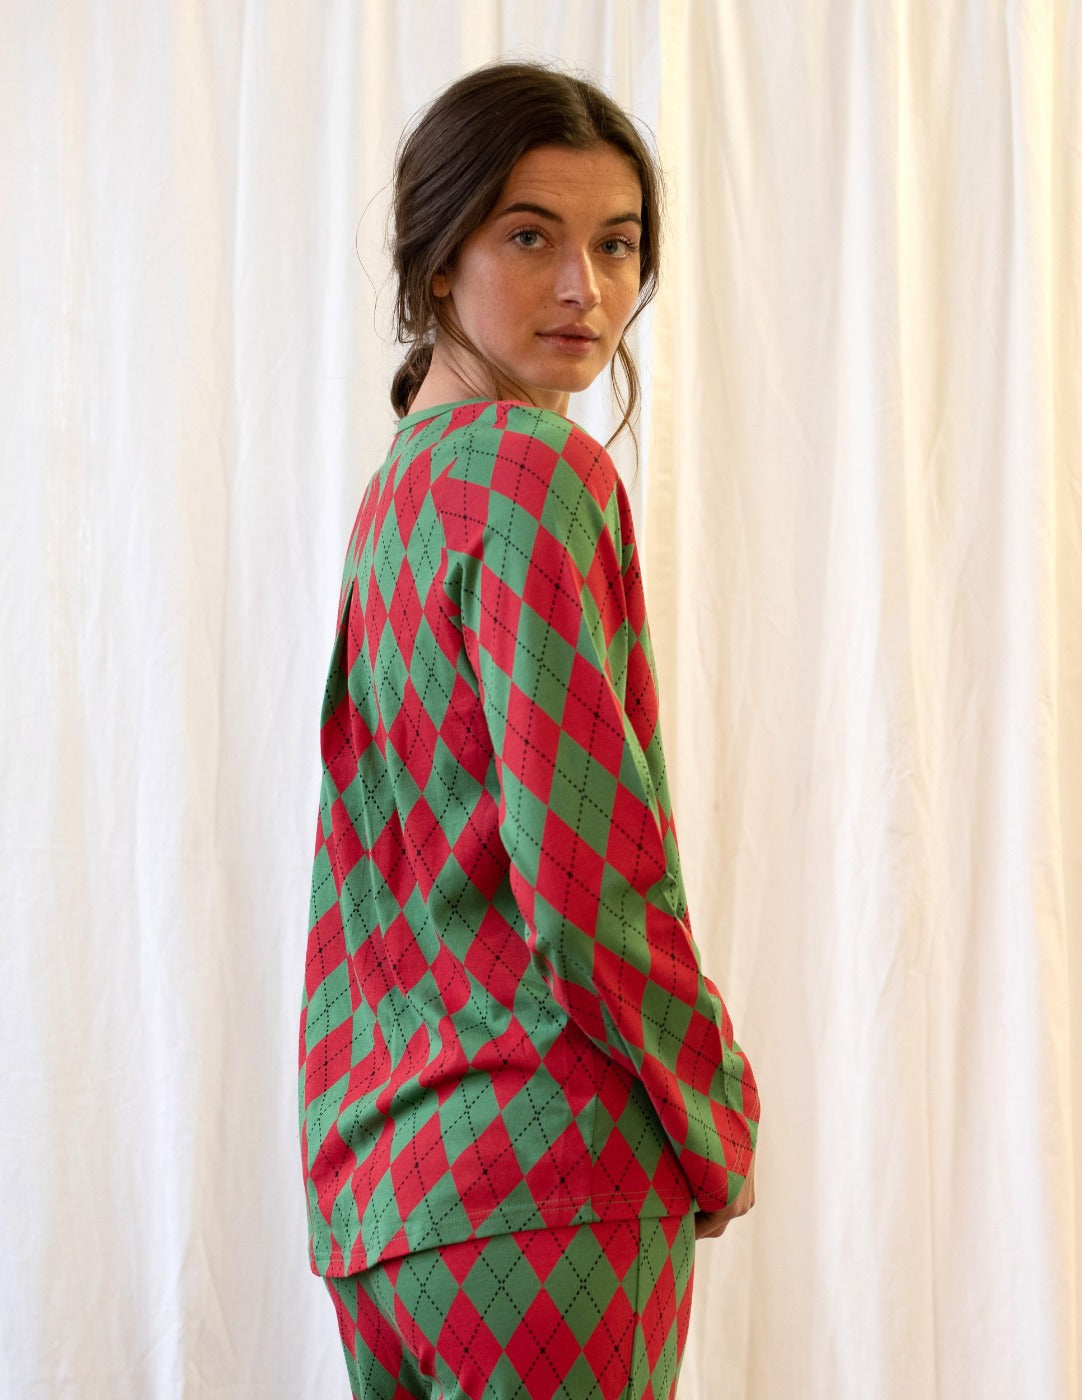 red and green argyle women's cotton pajama